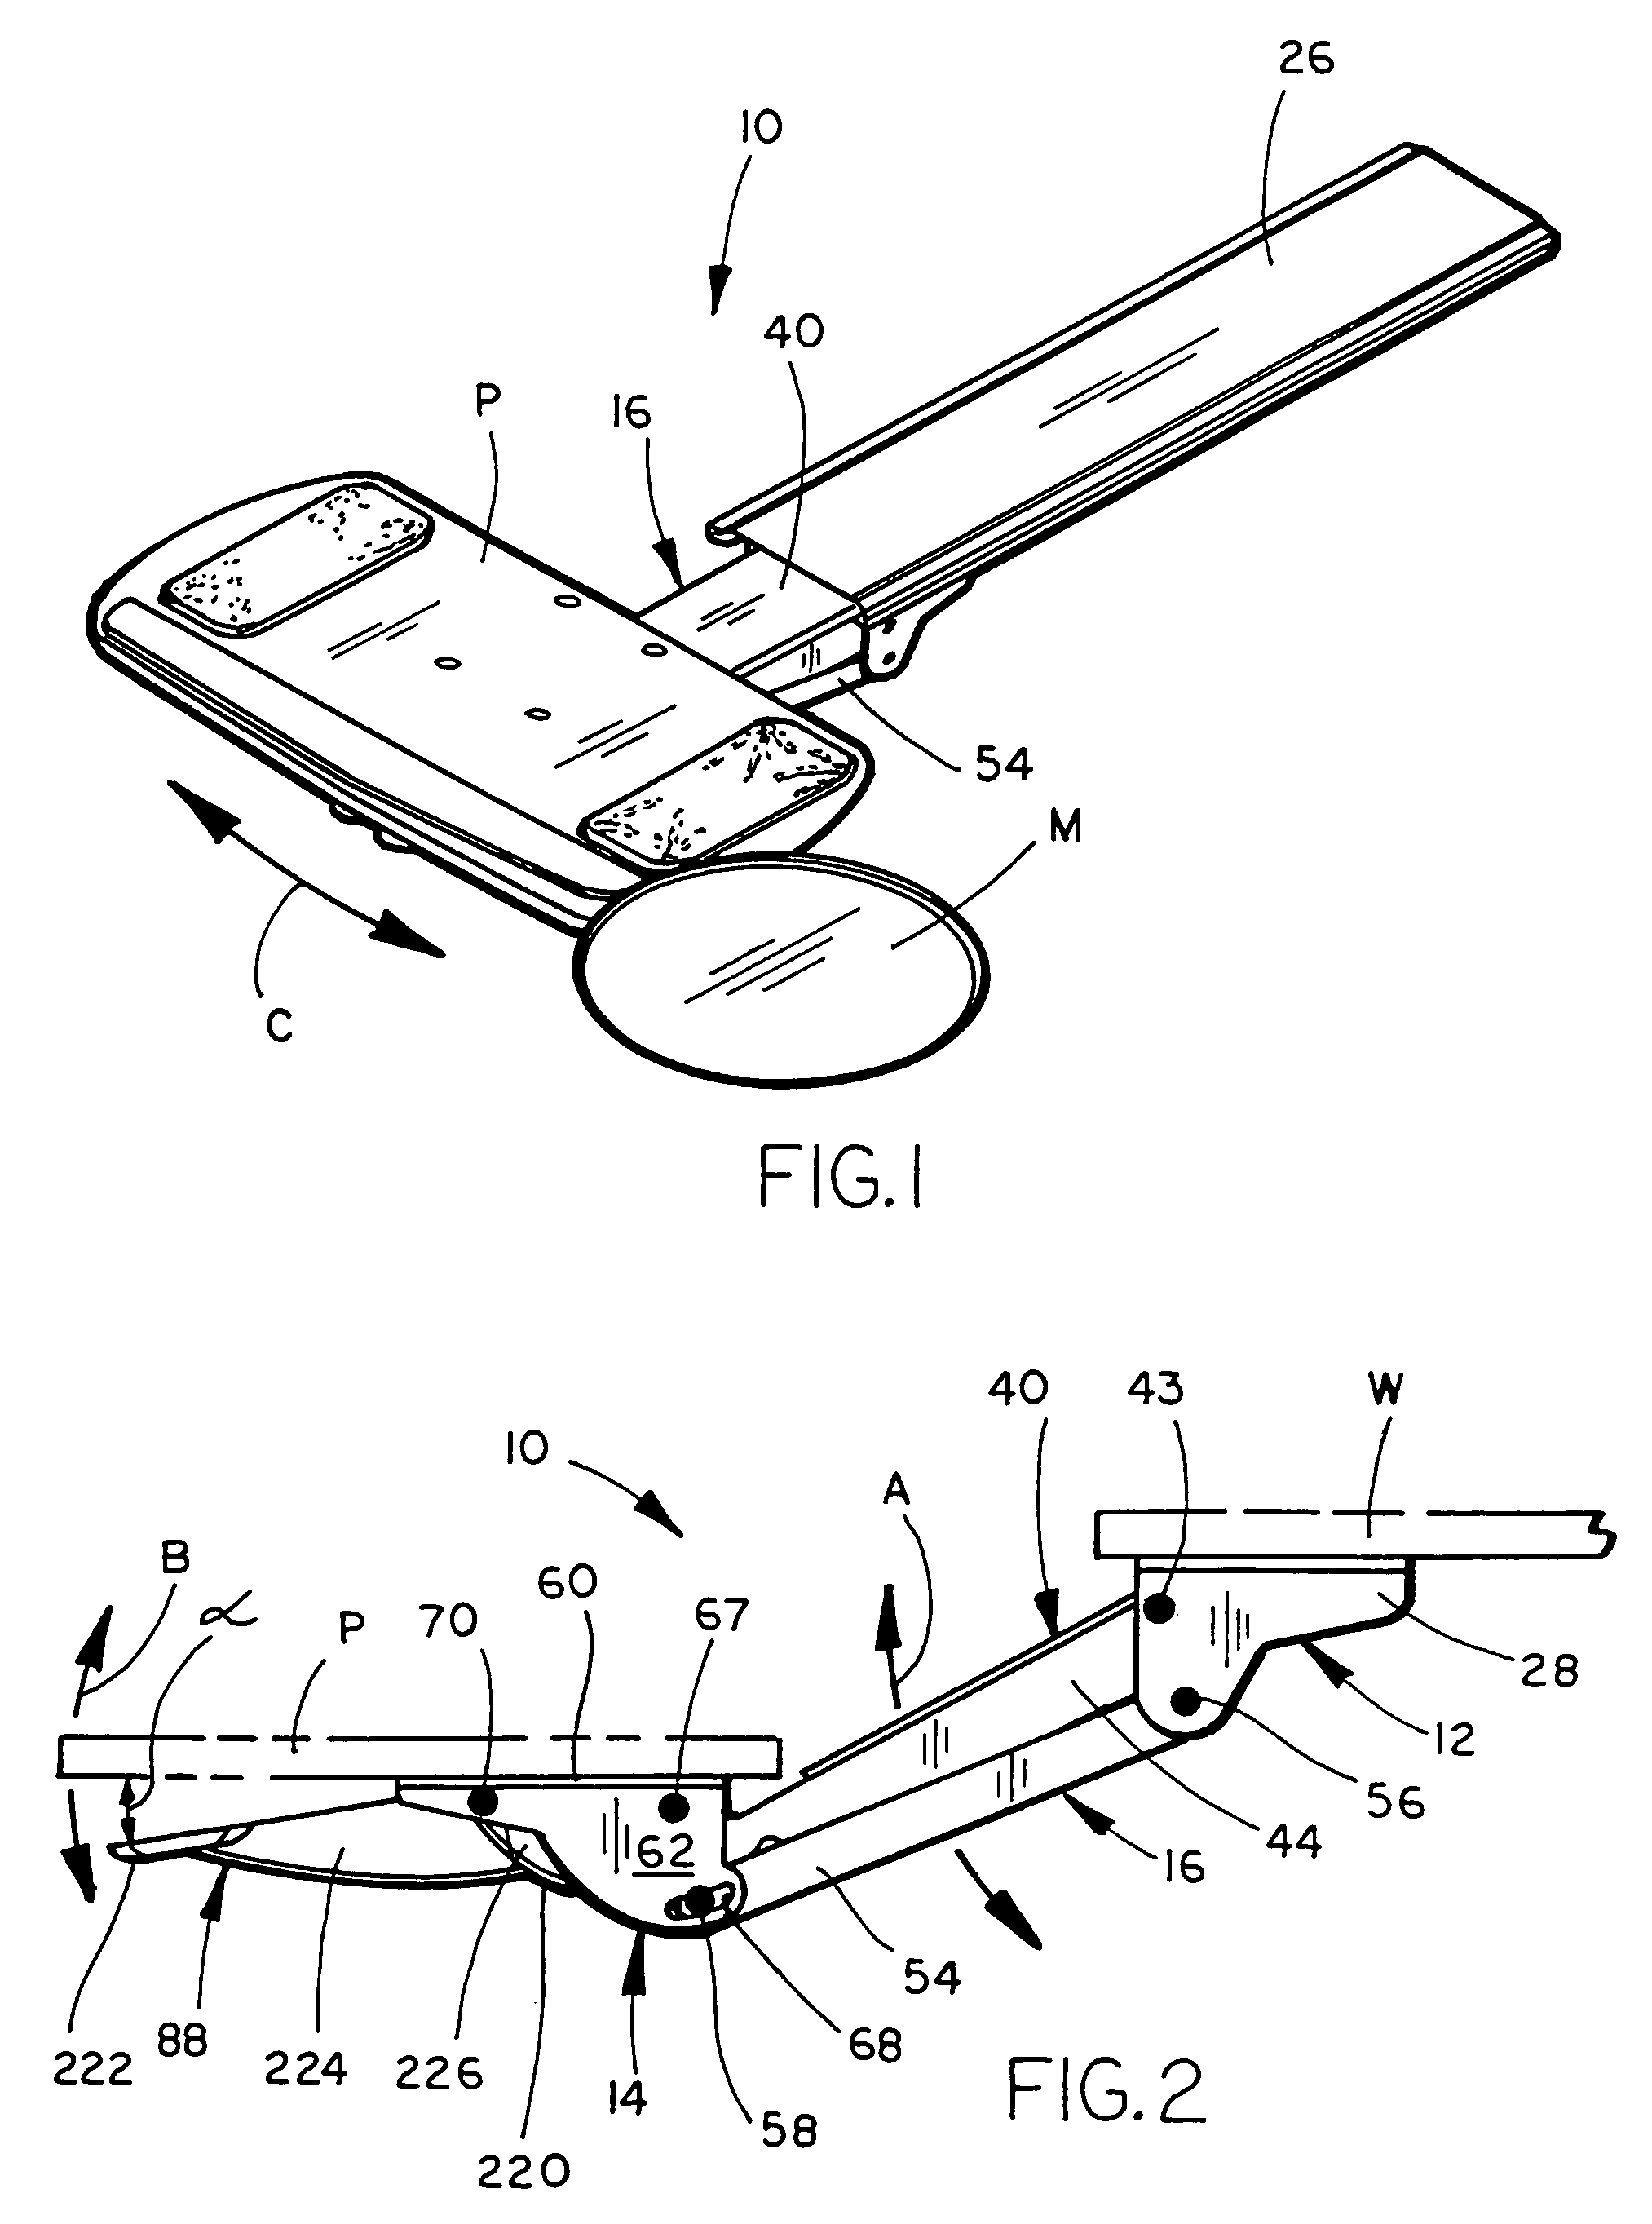 Adjustable support for data entry/interface device